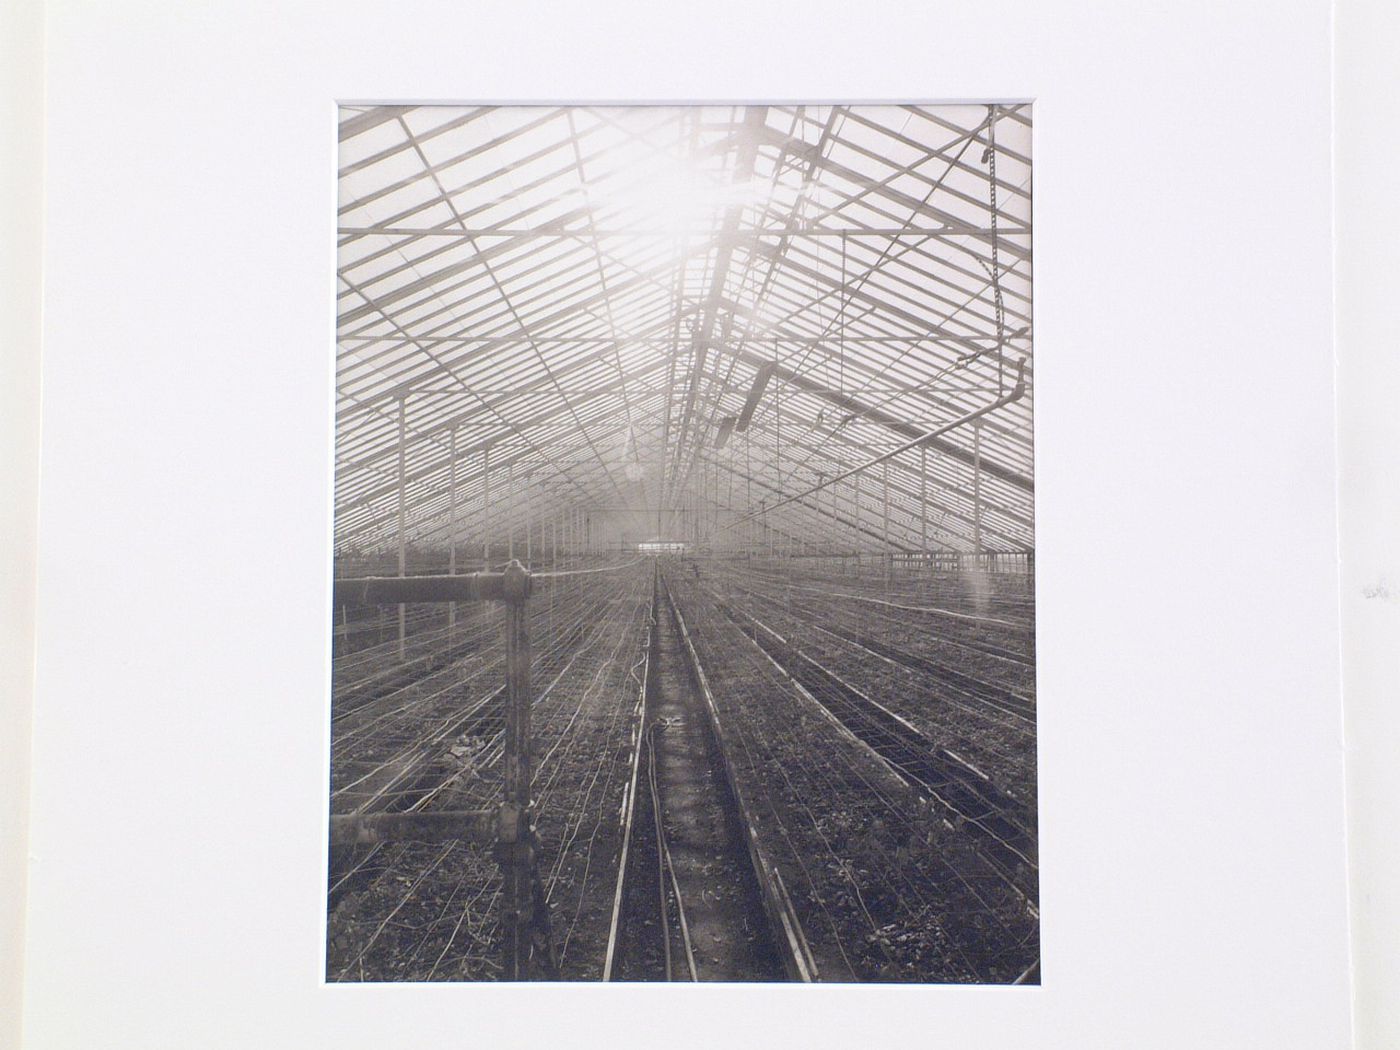 Interior of large greenhouse, from Greenhouse series 1980